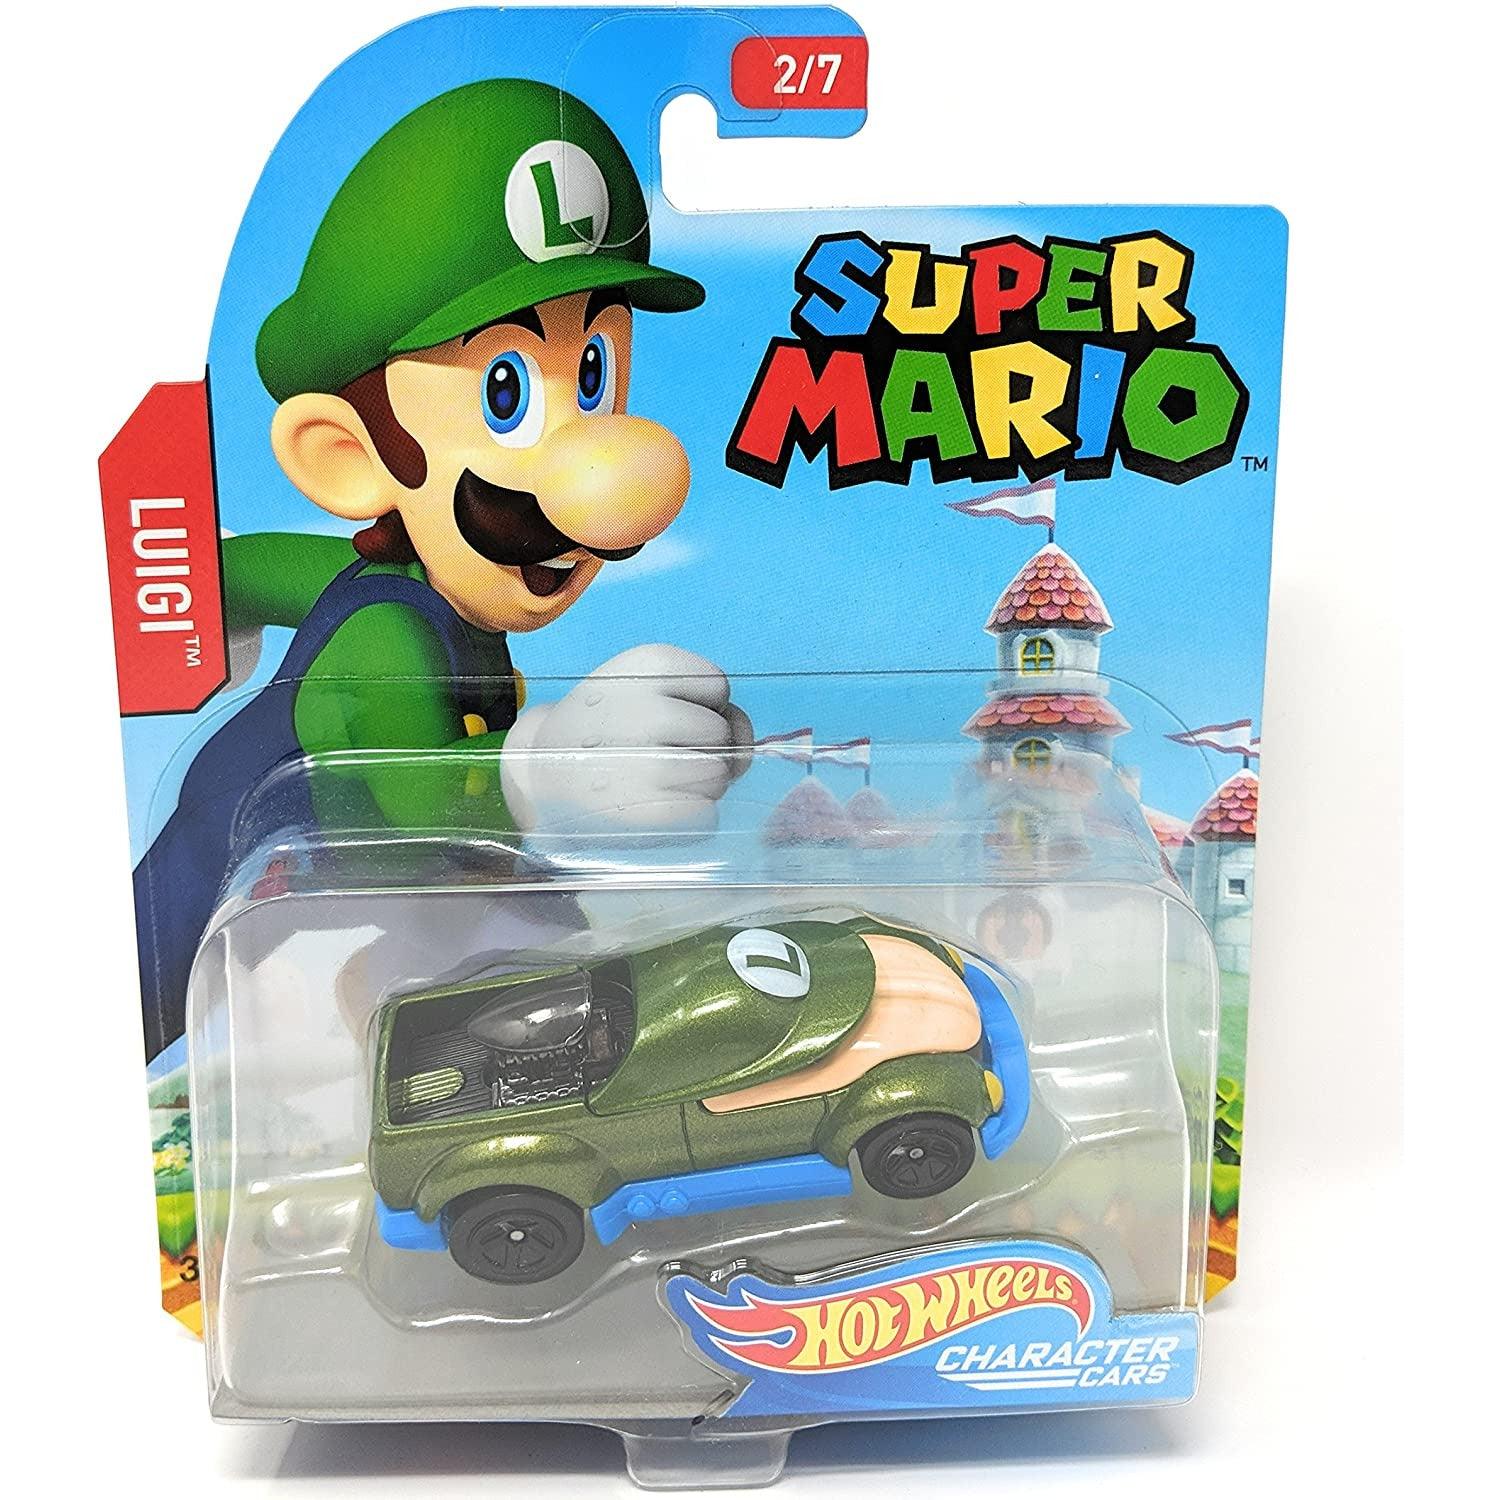 Hot Wheels Super Mario Character Cars Luigi Vehicle 2/7 - BumbleToys - 4+ Years, 5-7 Years, 8-13 Years, Boys, Collectible Vehicles, Pre-Order, Super Mario